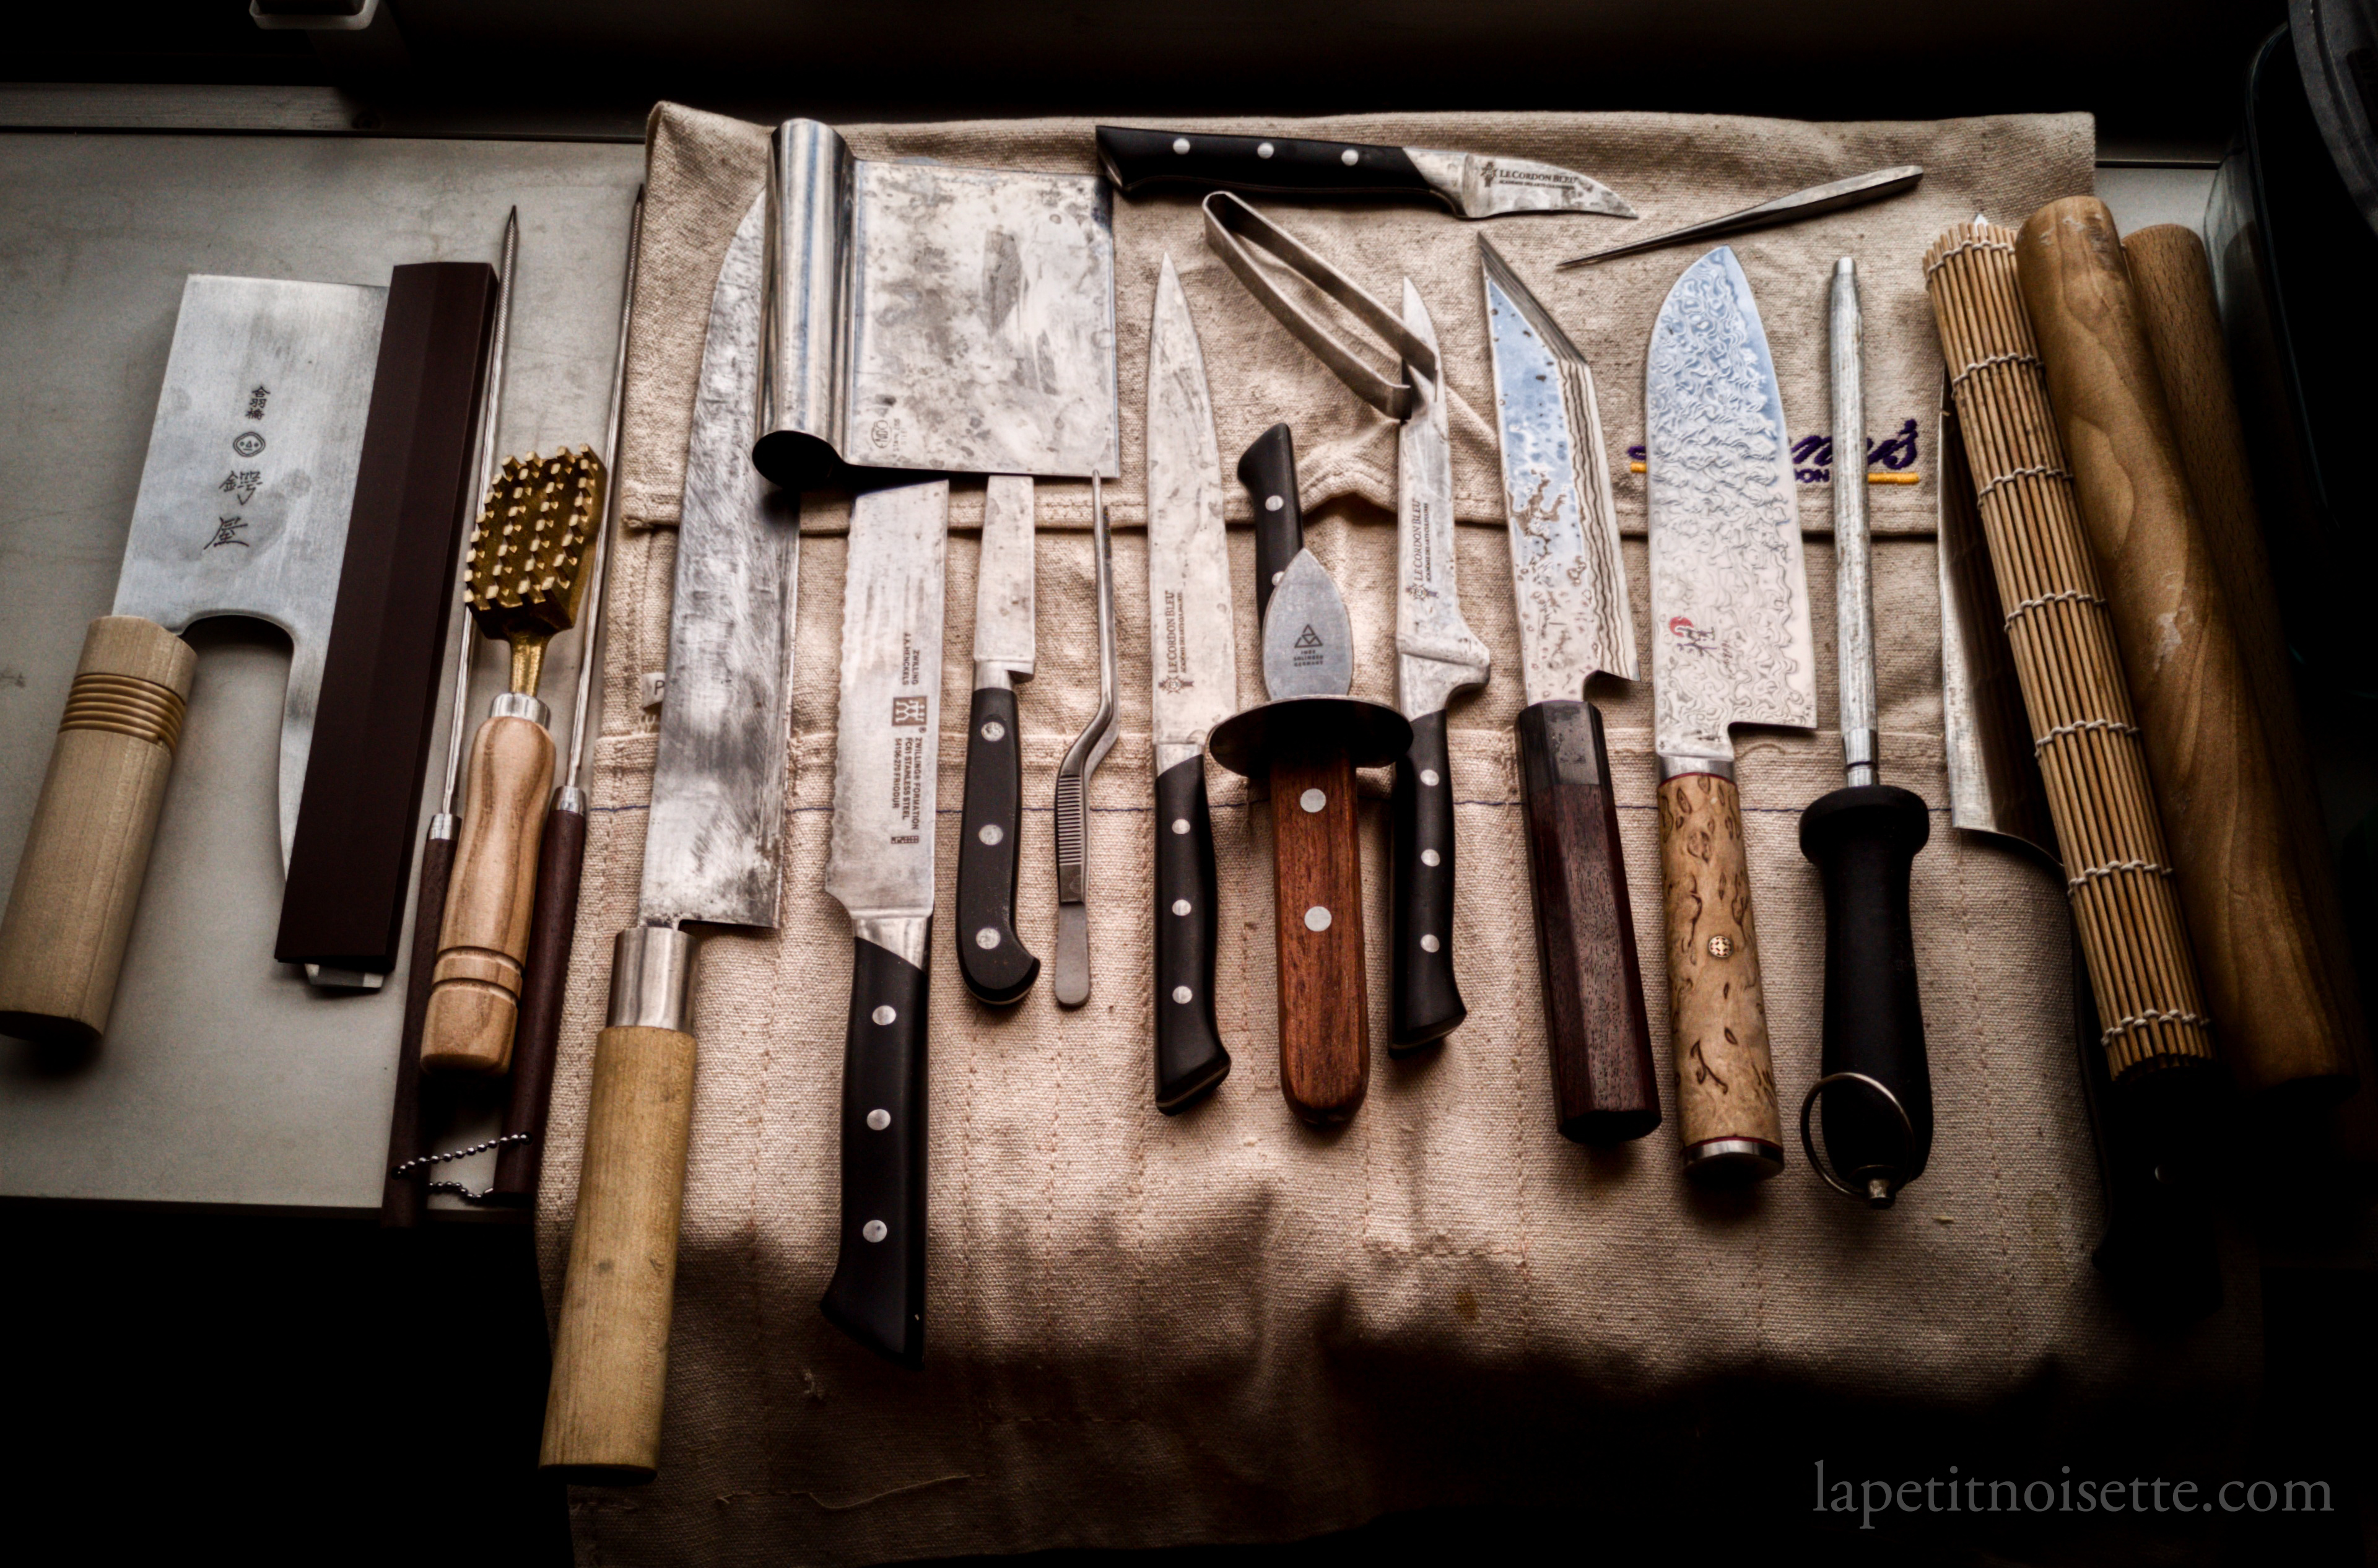 Various knives used in a Japanese kitchen.